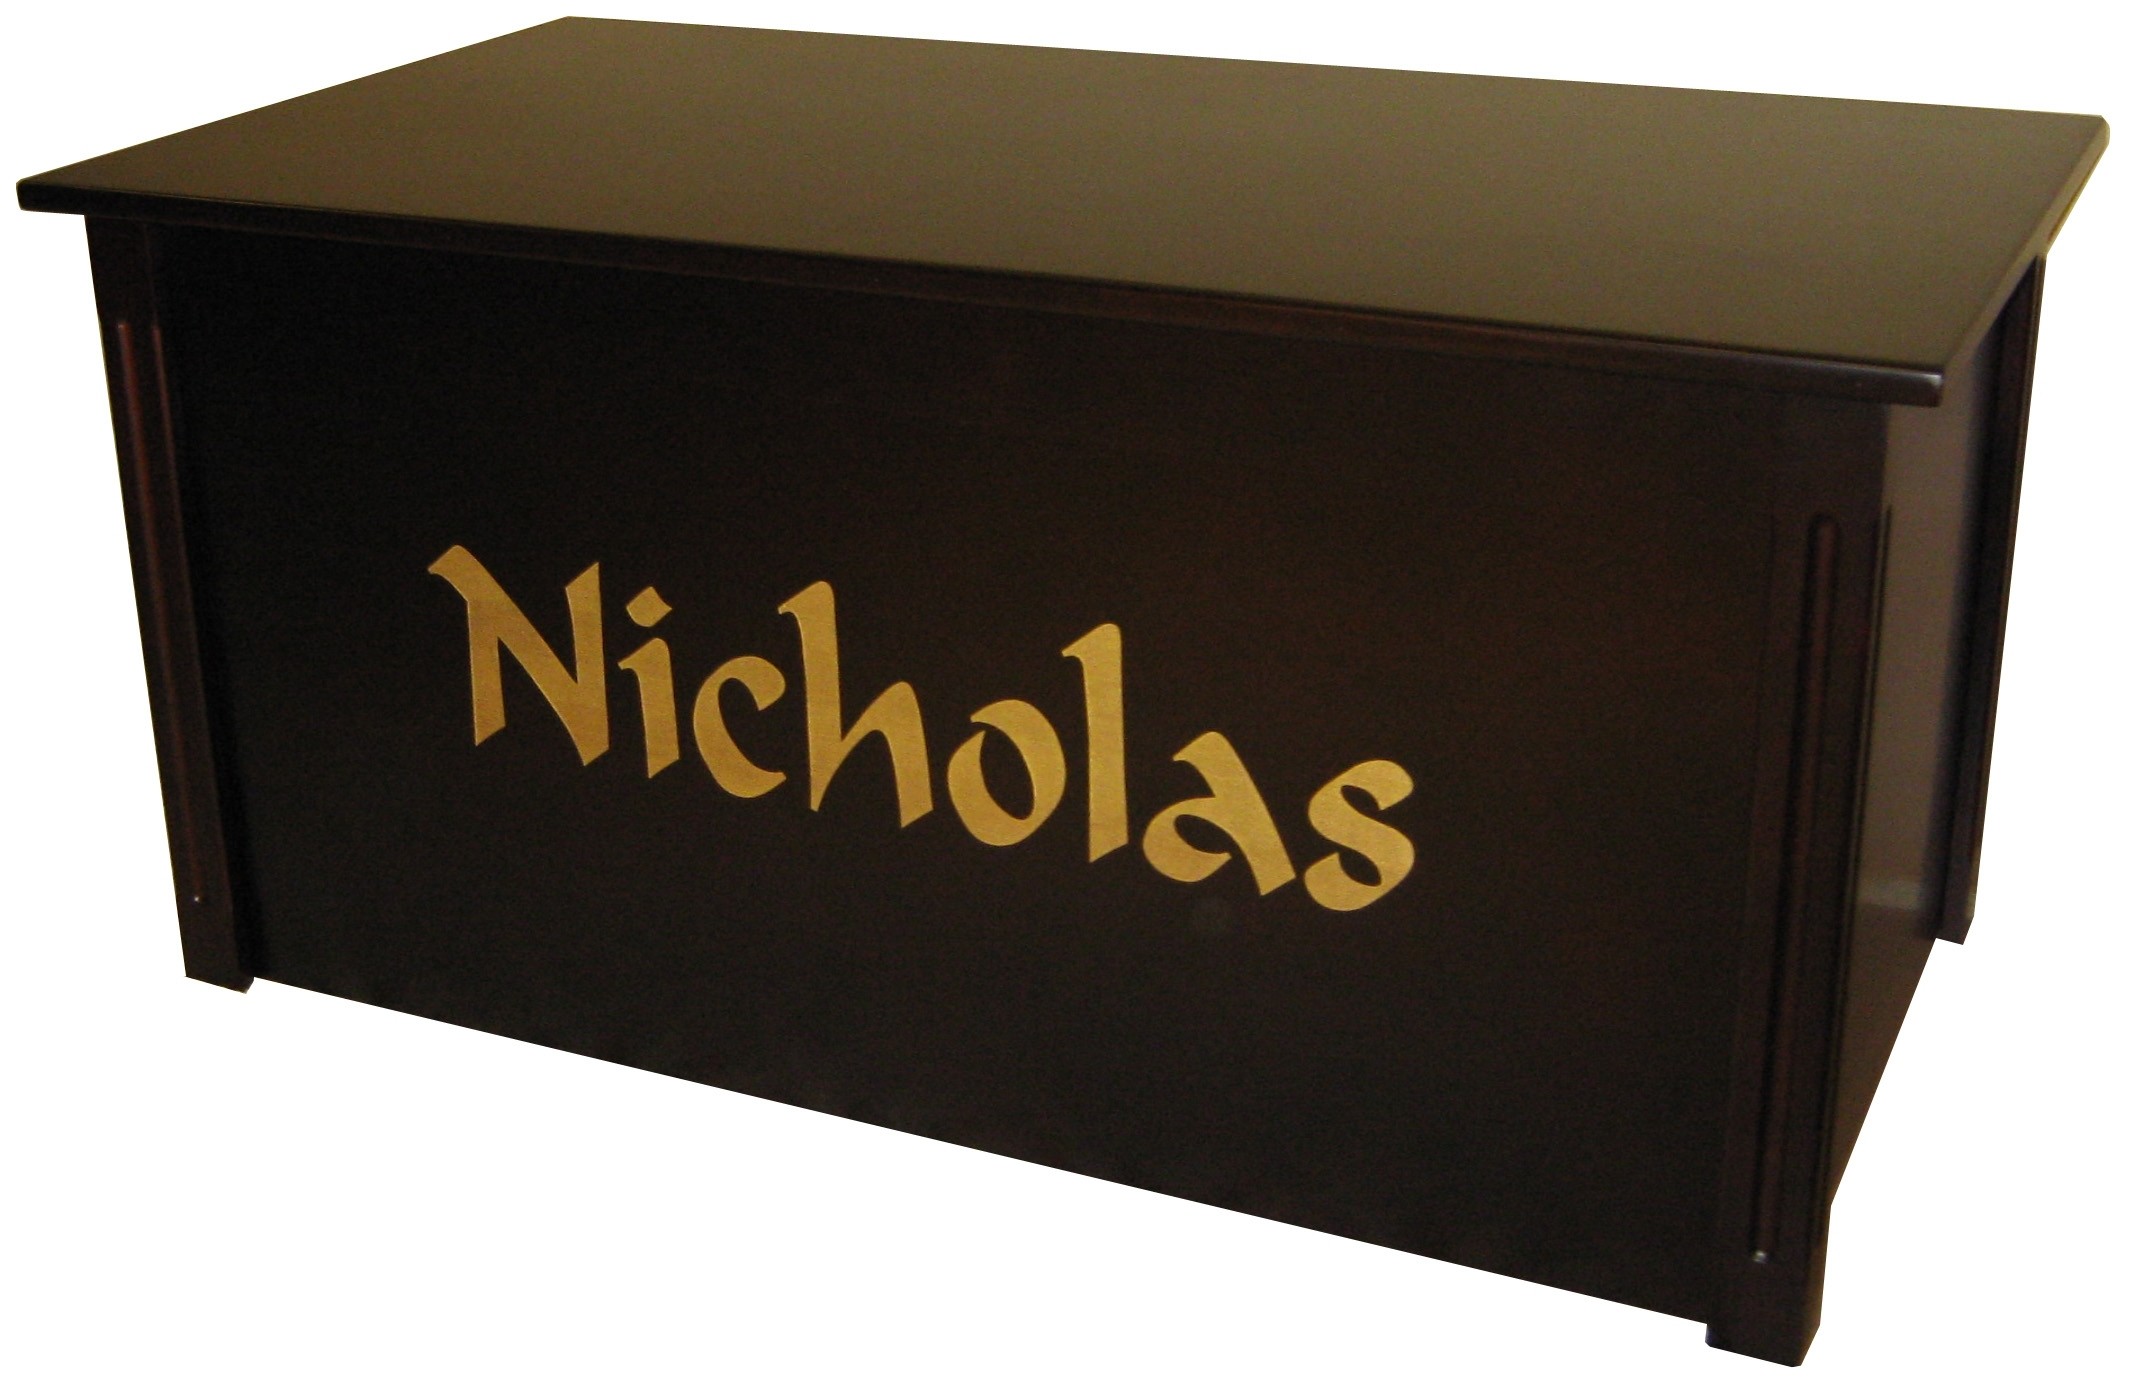 Personalised toy chests